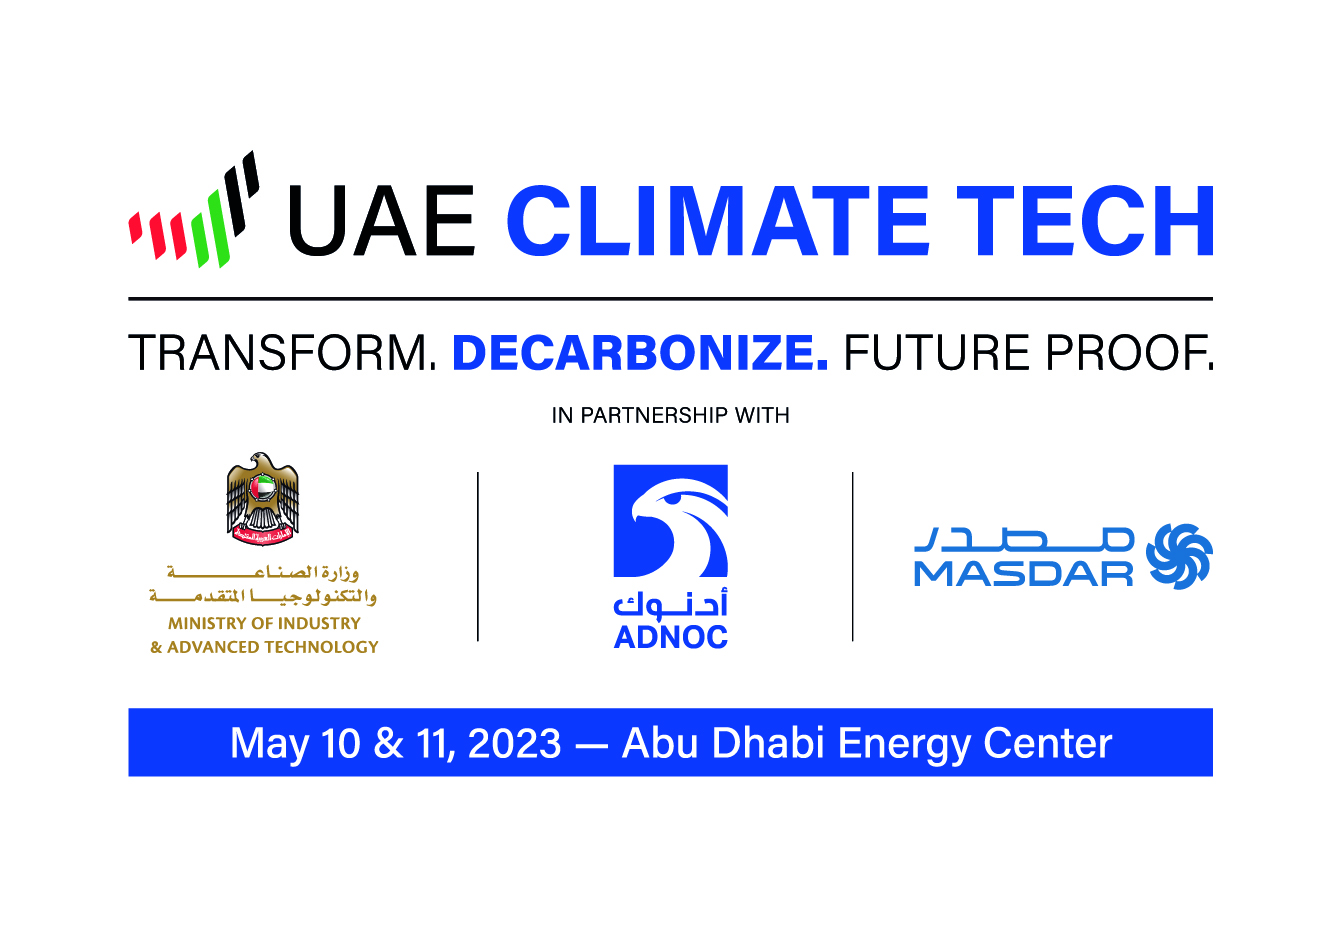 UAE CLIMATE TECH: Transforming, Decarbonizing and Future-Proofing for net zero